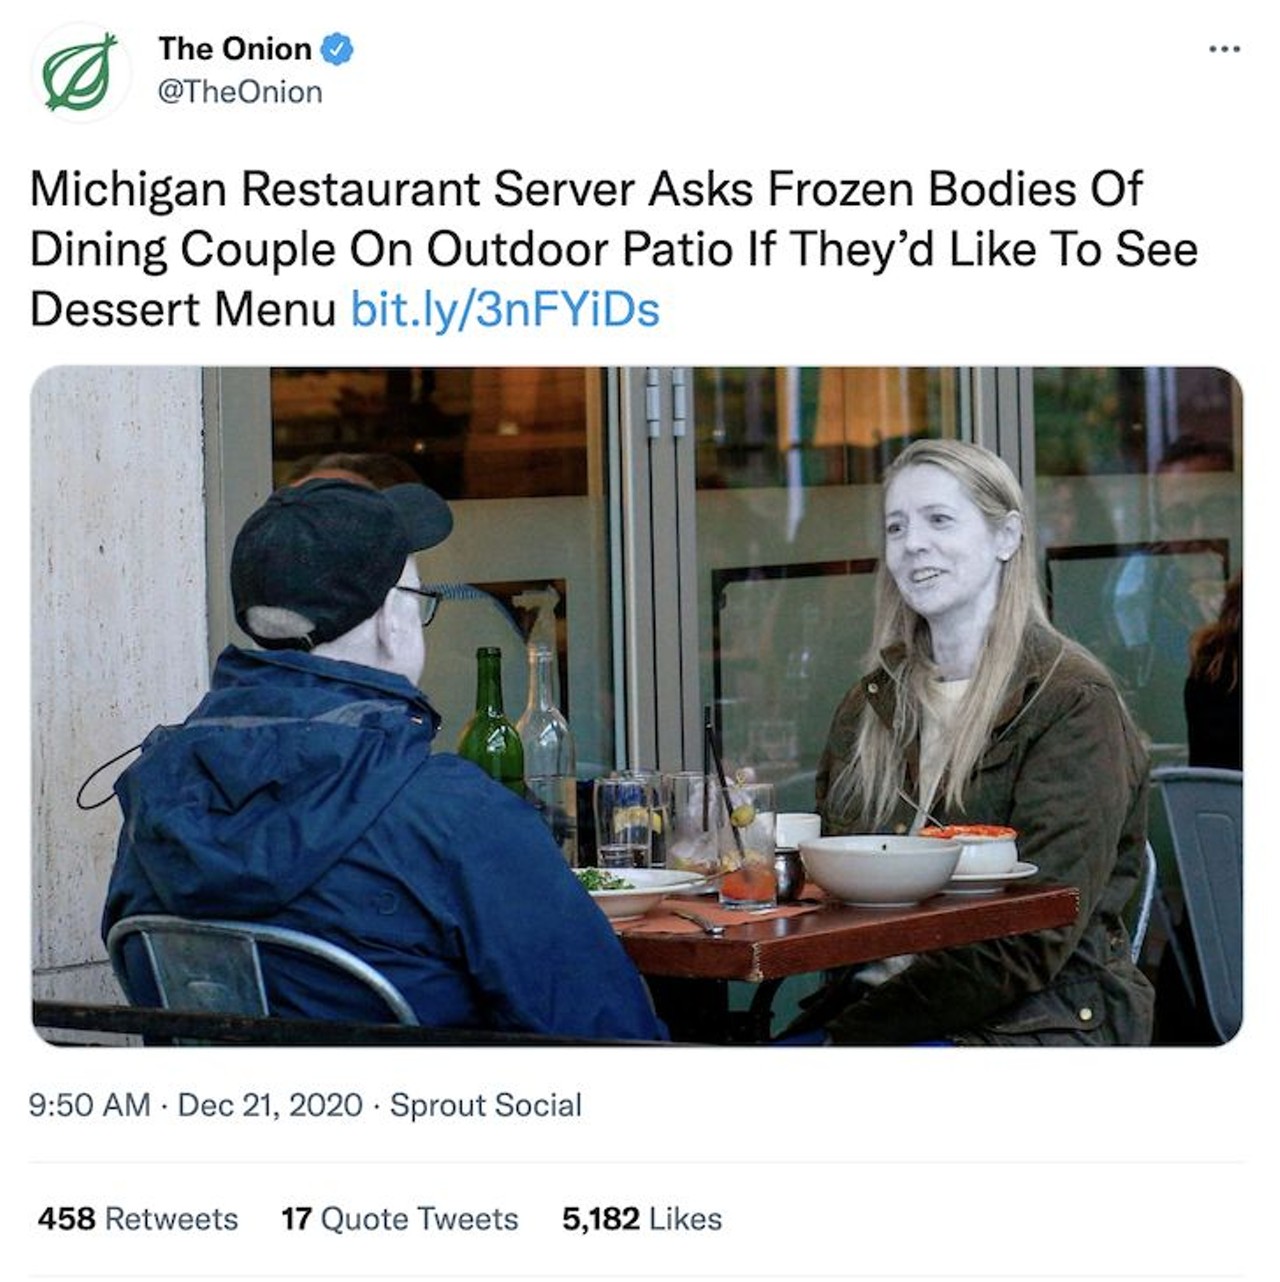 Michigan Restaurant Server Asks Frozen Bodies Of Dining Couple On Outdoor Patio If They&#146;d Like To See Dessert Menu
COVID-19 guidelines face difficulties in winter in Michigan as a waitress is seen asking two frozen bodies seated on the patio what they would like for dessert.